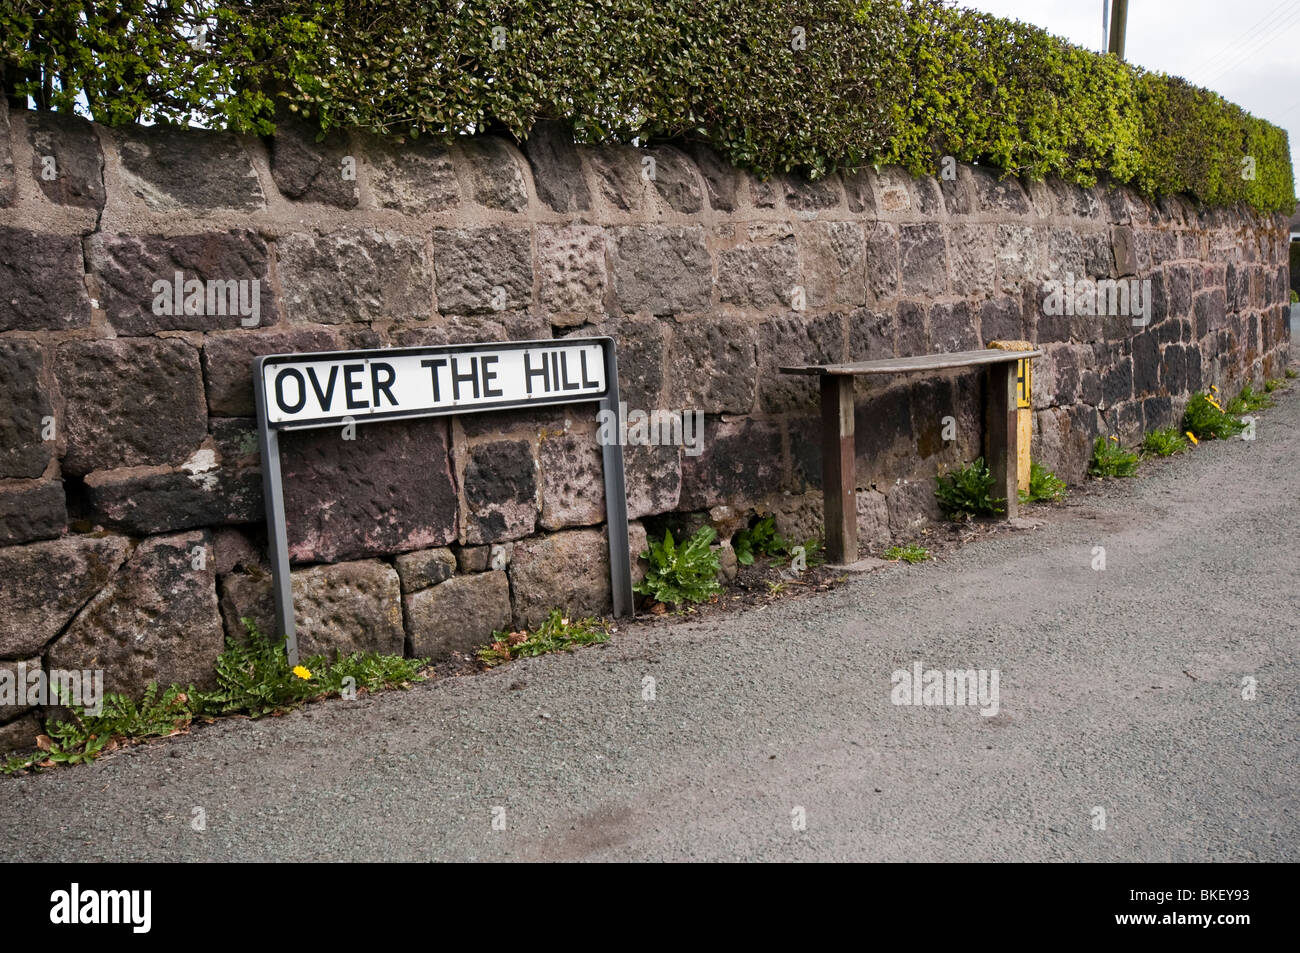 A road sign for 'Over The Hill' at Biddulph Moor, near Stoke-upon-Trent, Staffordshire. Stock Photo